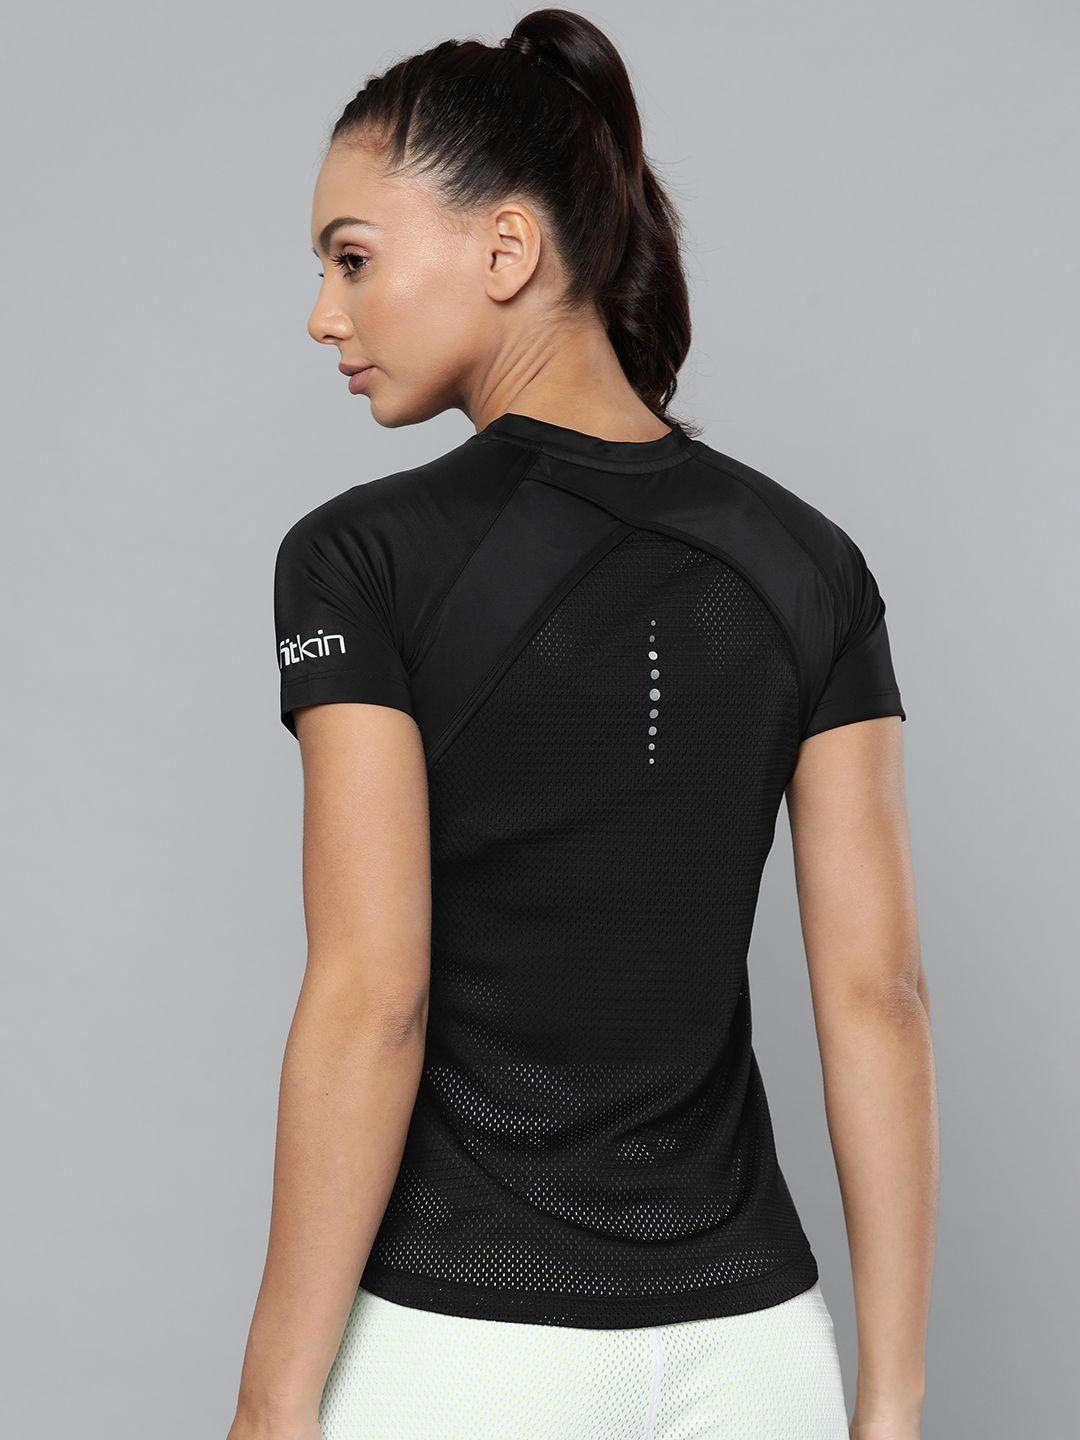 fitkin women black slim fit training or gym t-shirt